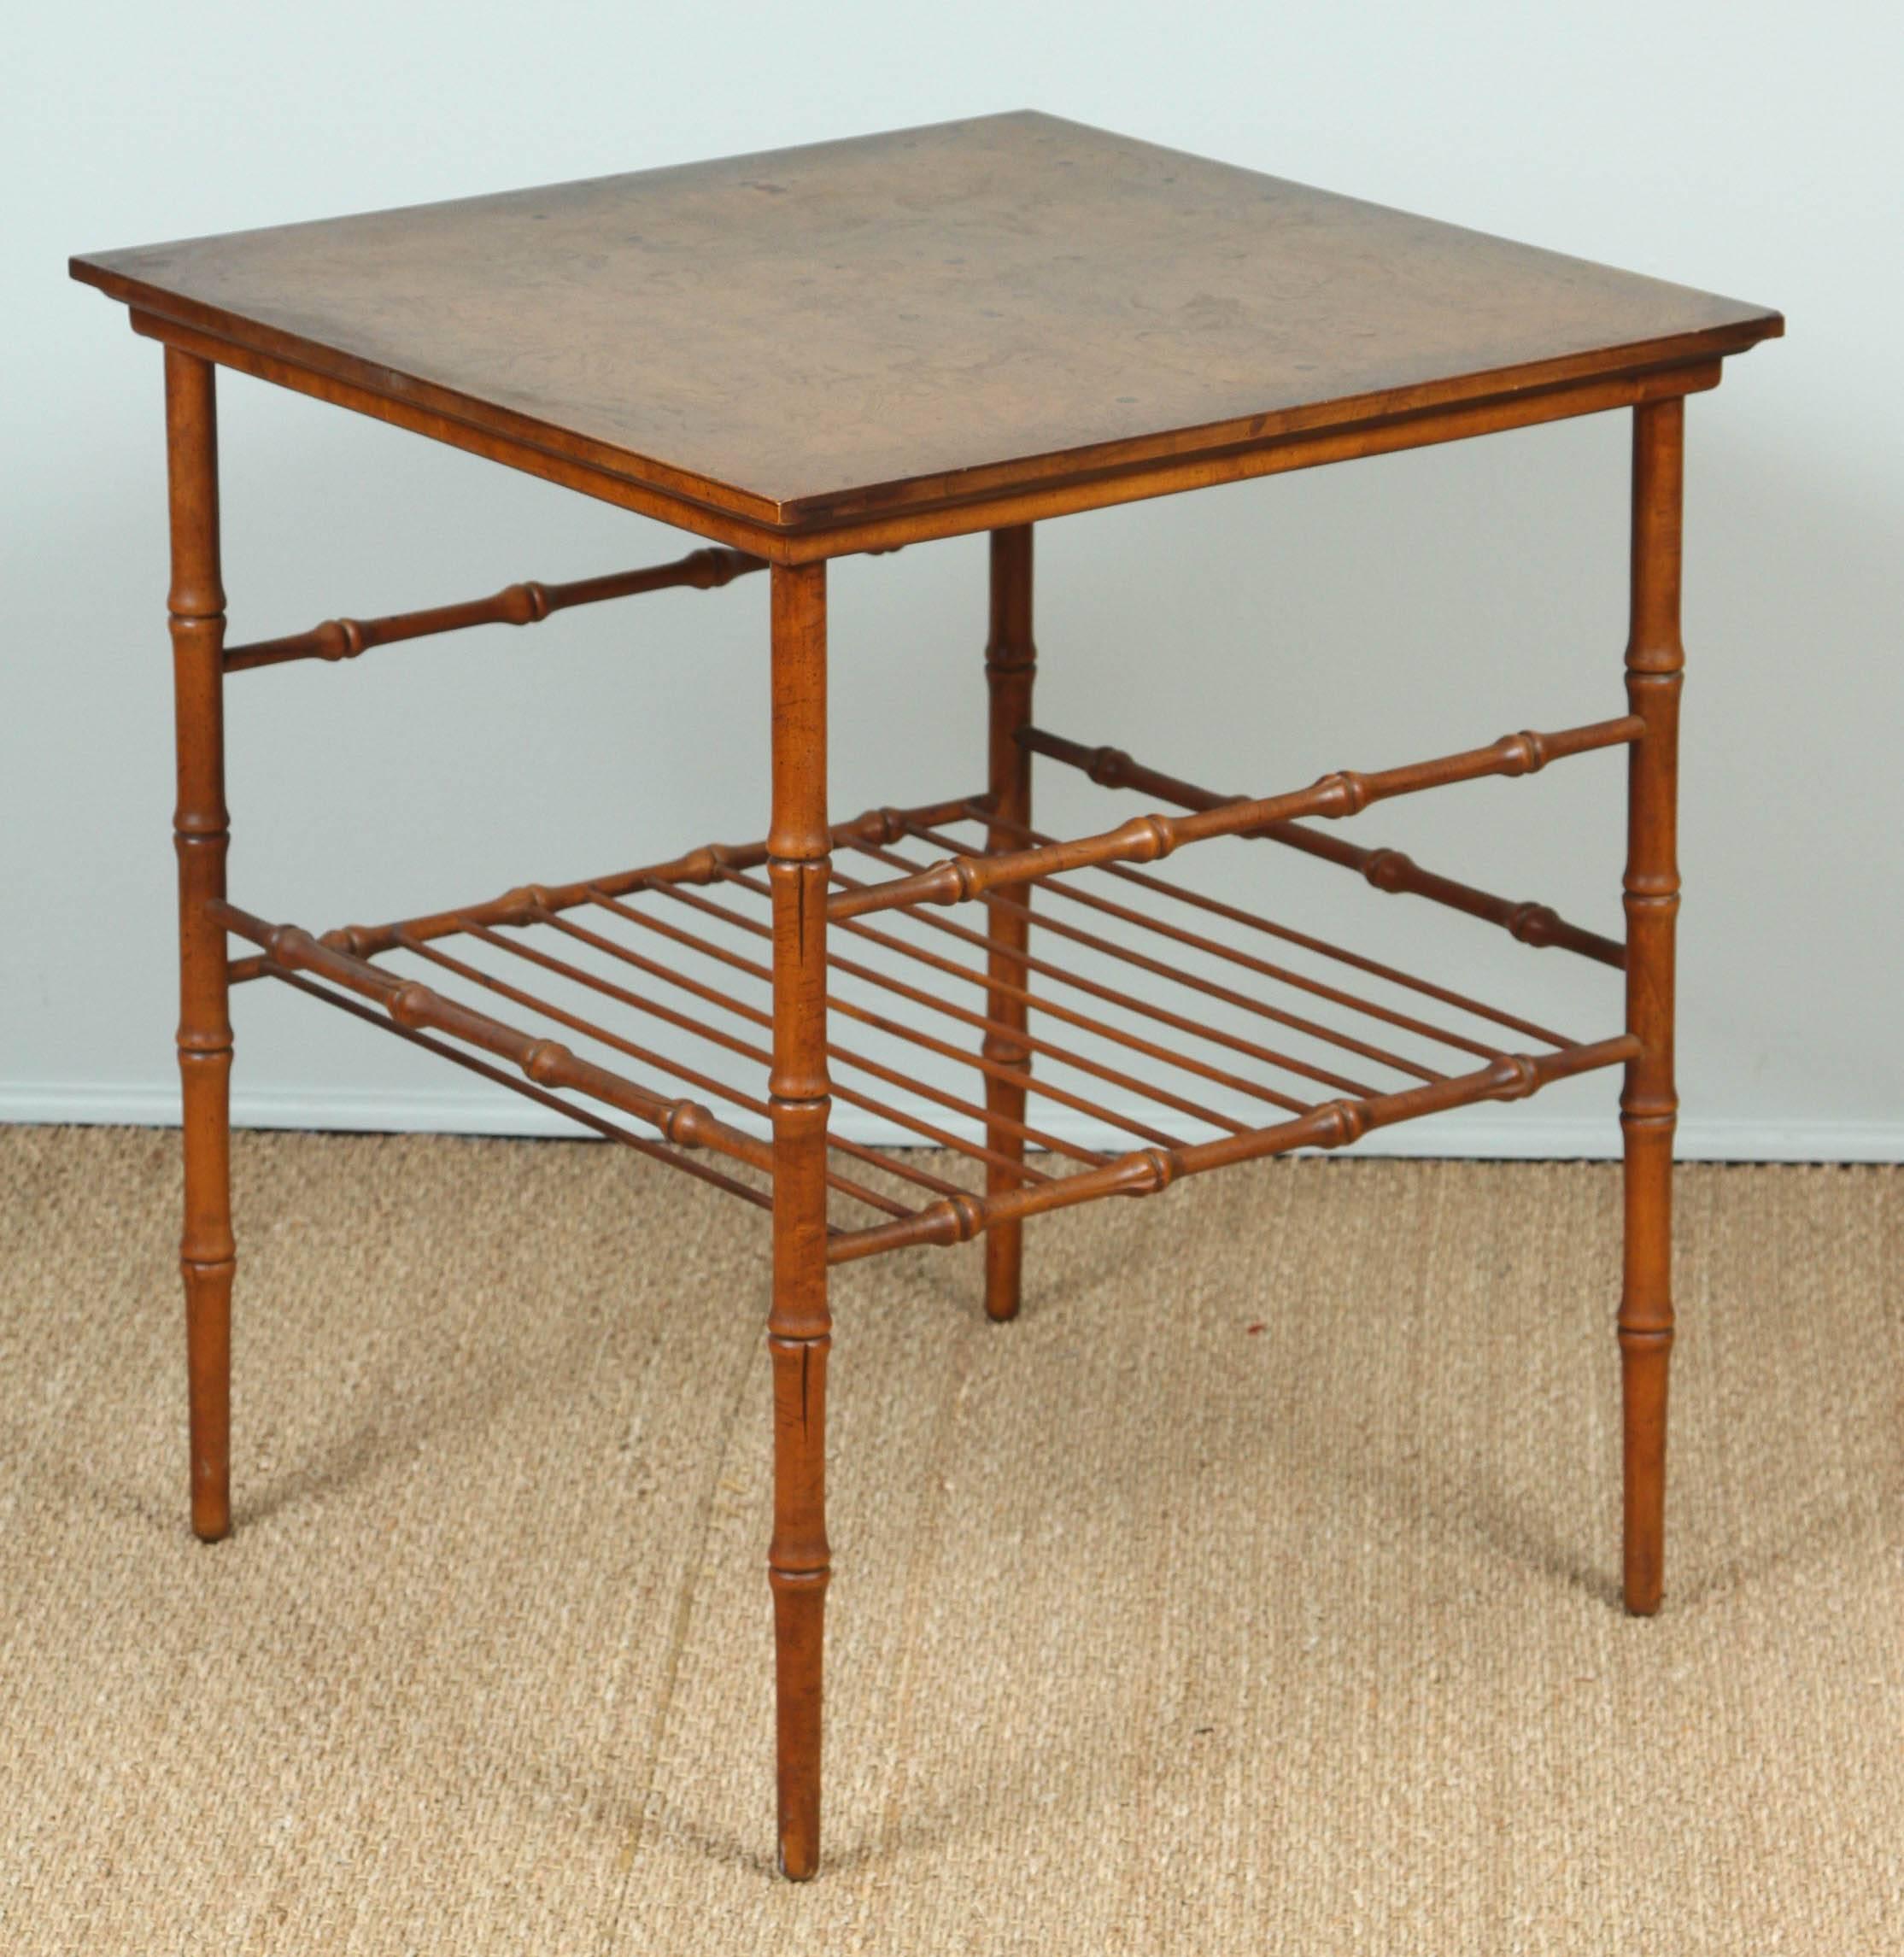 Faux bamboo side table with magazine rack. Out of production design from American company still in business. Maker's mark visible on underside of top.